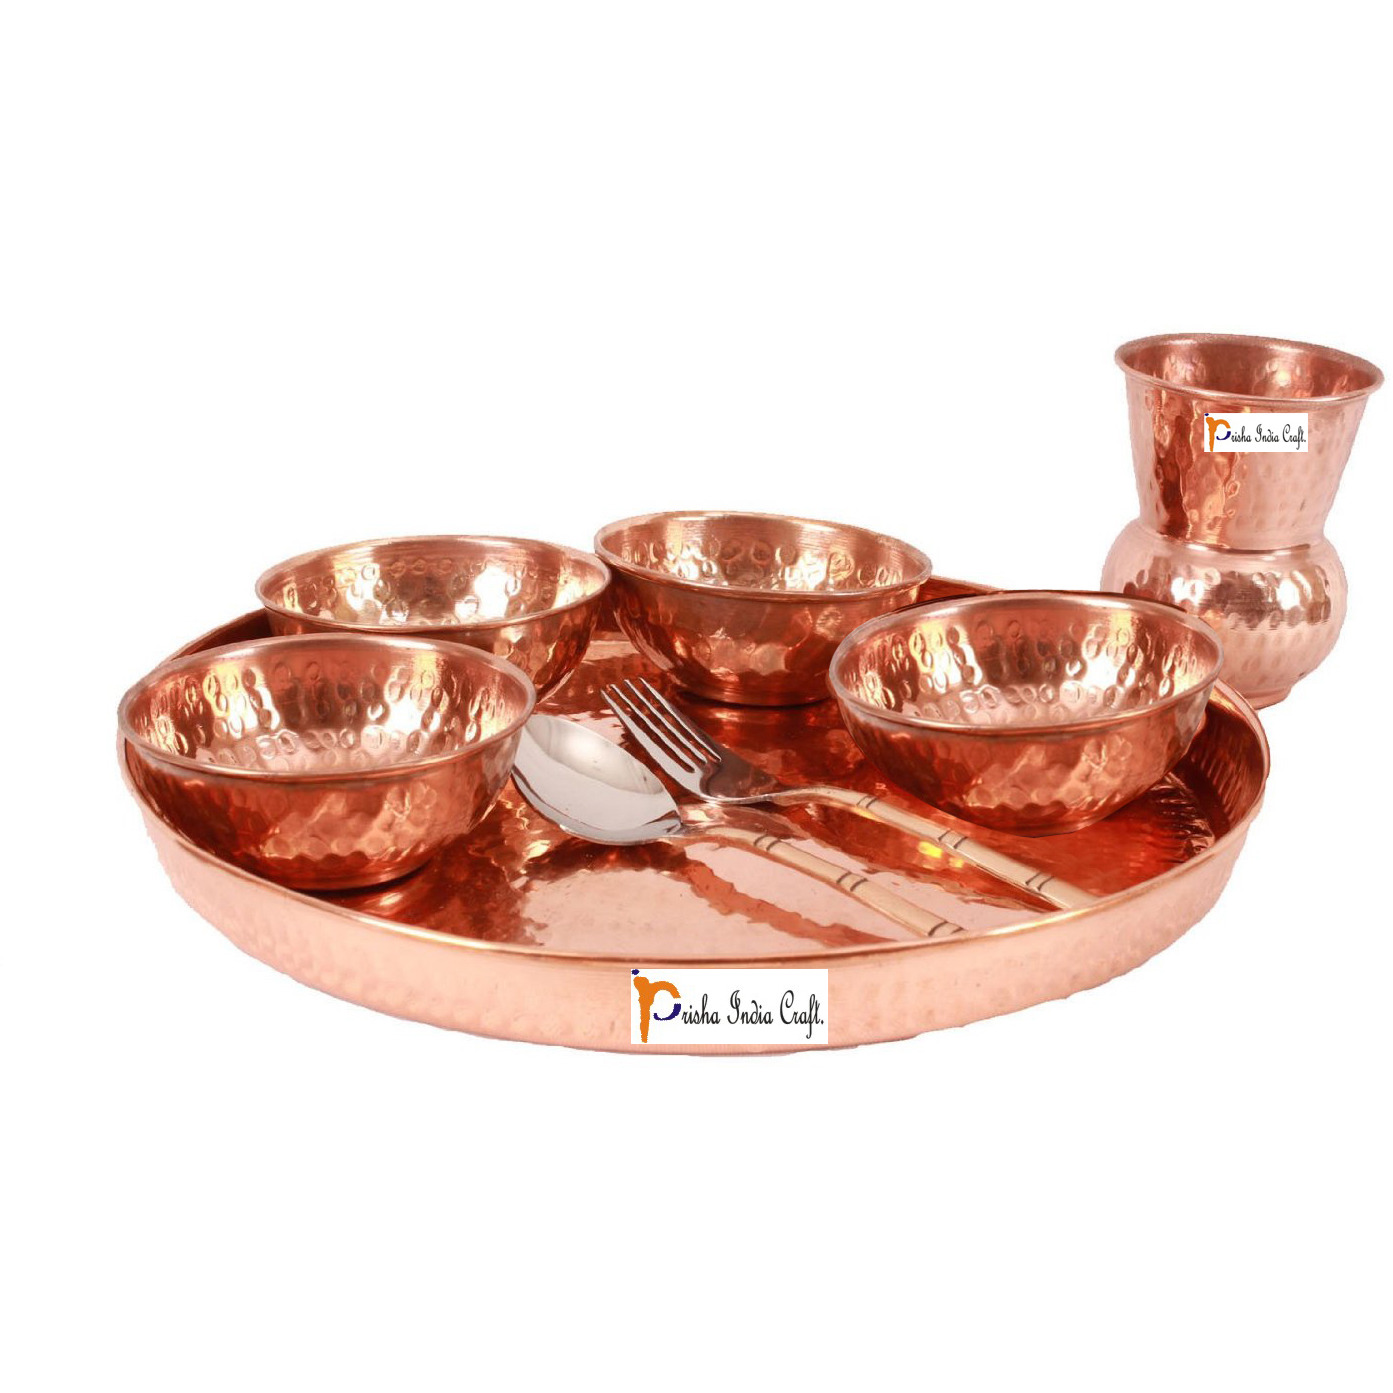 Prisha India Craft B. Dinnerware Traditional 100% Pure Copper Dinner Set of Thali Plate, Bowls, Glass and Spoon, Dia 12  With 1 Luxury Style Pure Copper Pitcher Jug - Christmas Gift